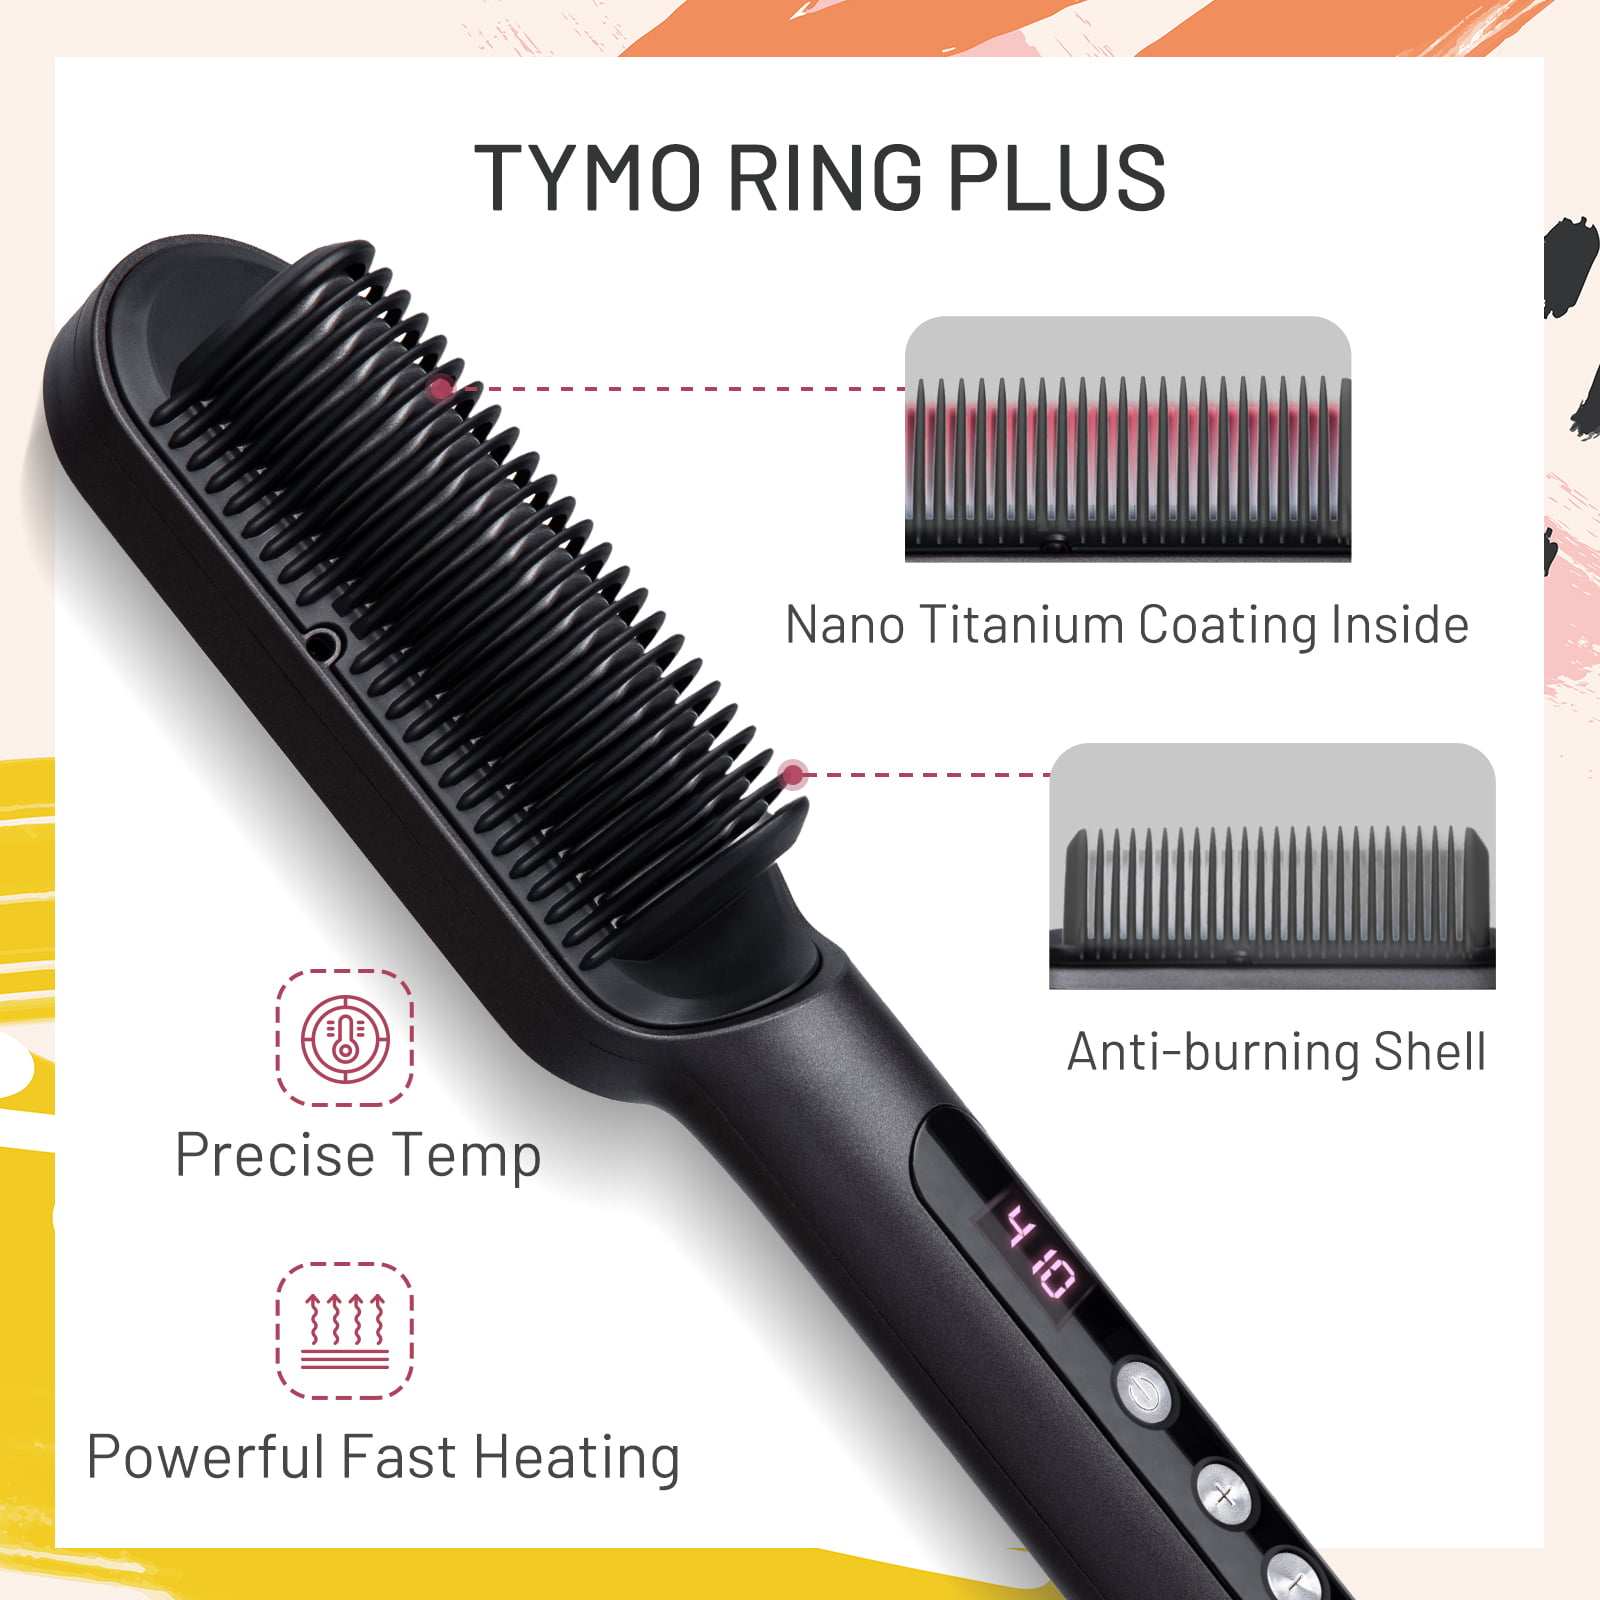 TYMO Ring Plus Ionic Hair Straightener Brush - Hair Straightening Comb with  Nano Titanium Coating for Even Heat, 9 Temp Settings & LED Screen,  Professional Hair Styling Tools, Gifts for Women